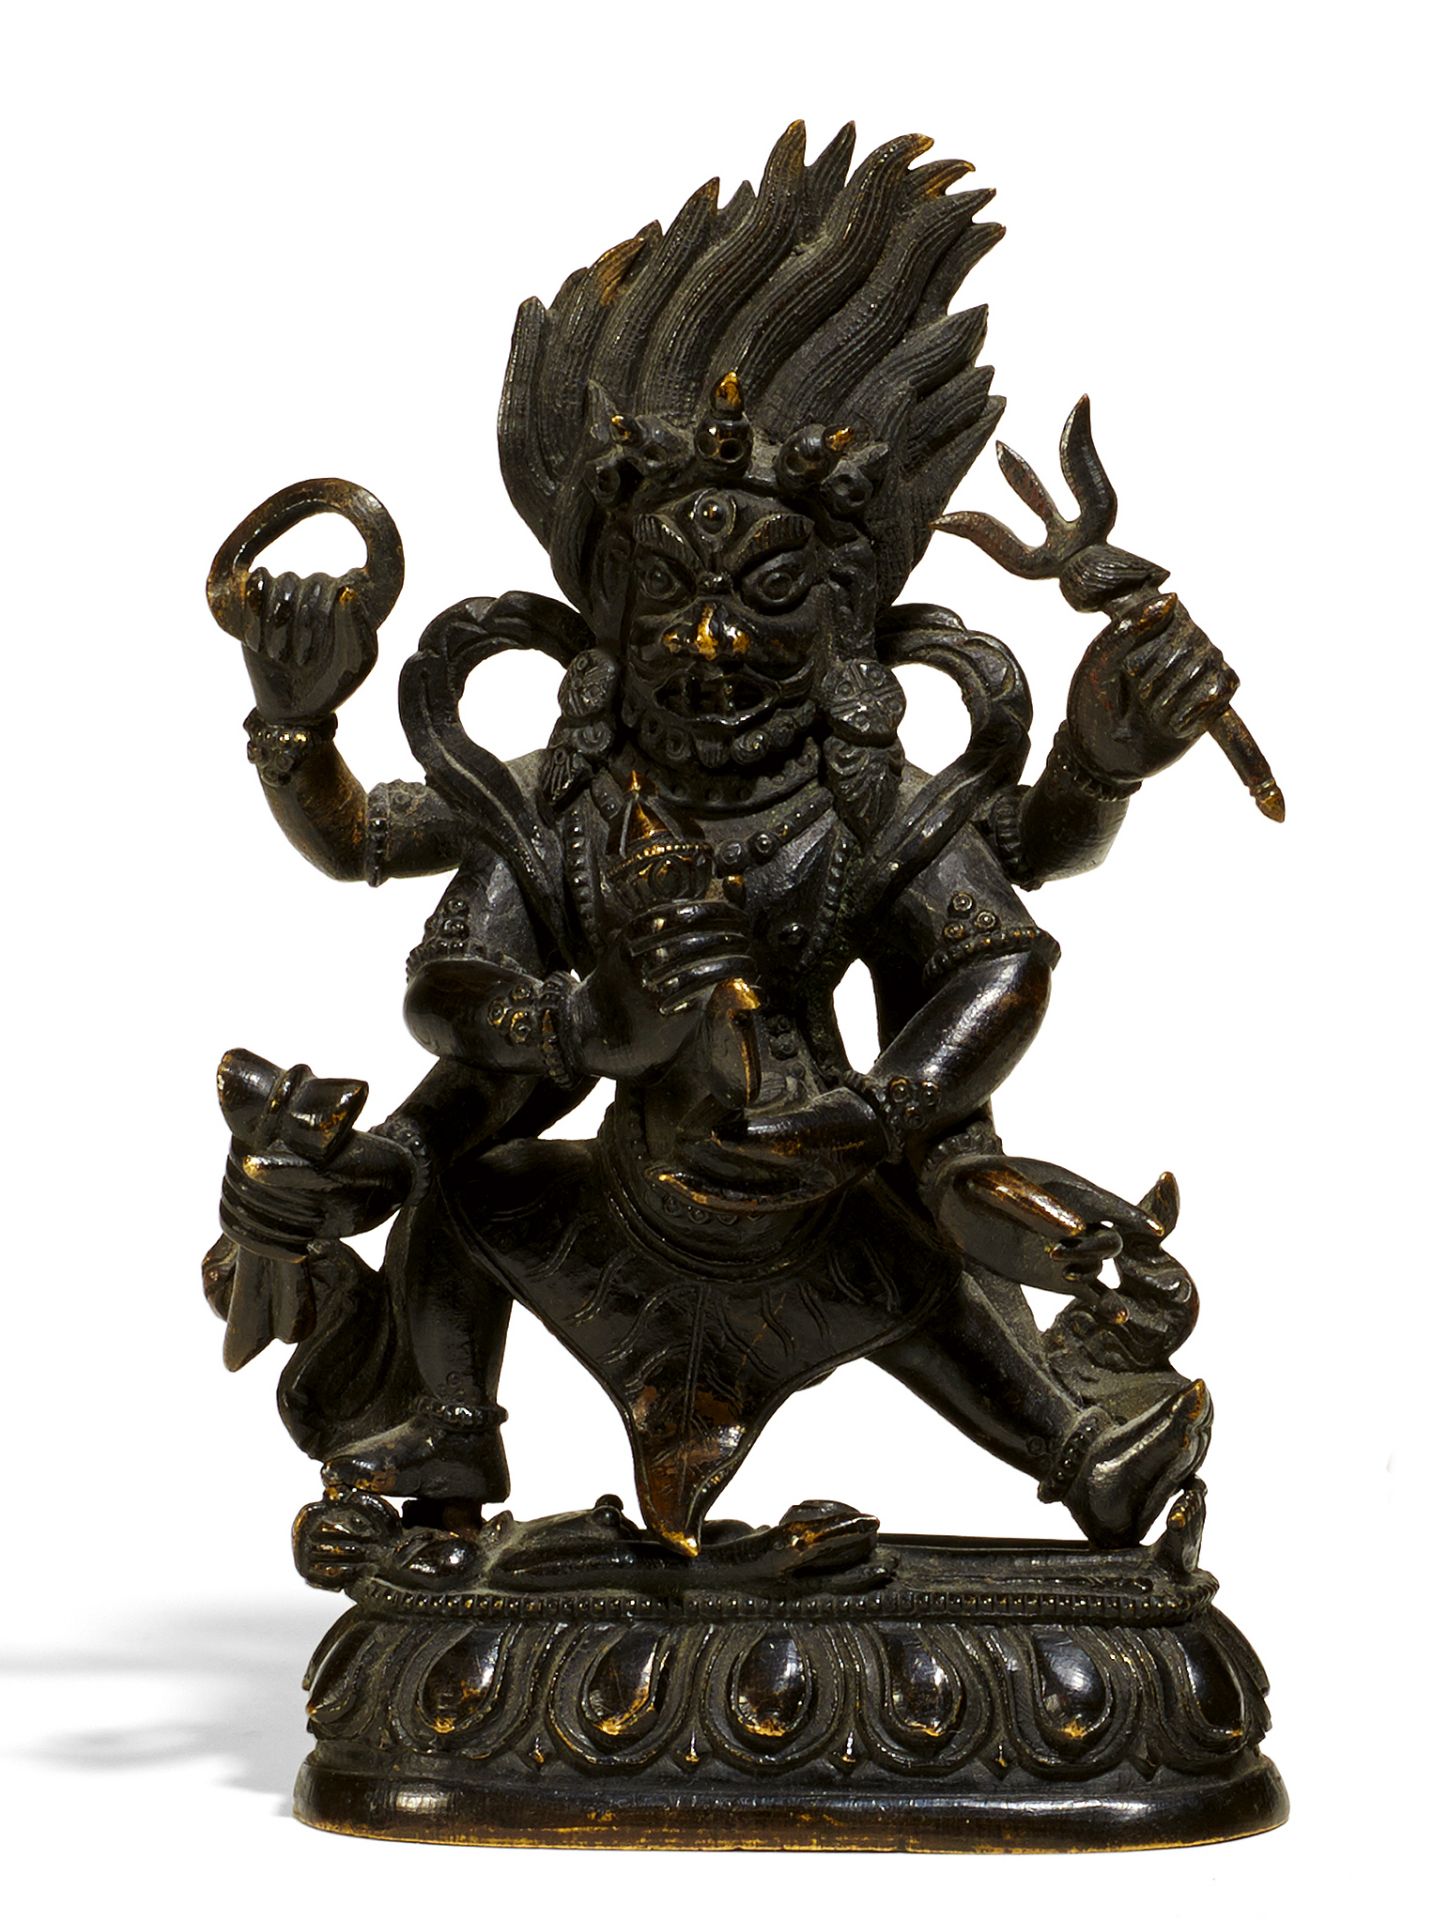 SADBHUJA MAHAKALA. Tibet. Finely worked, old and fire gilt bronze with brown black patina. Two-